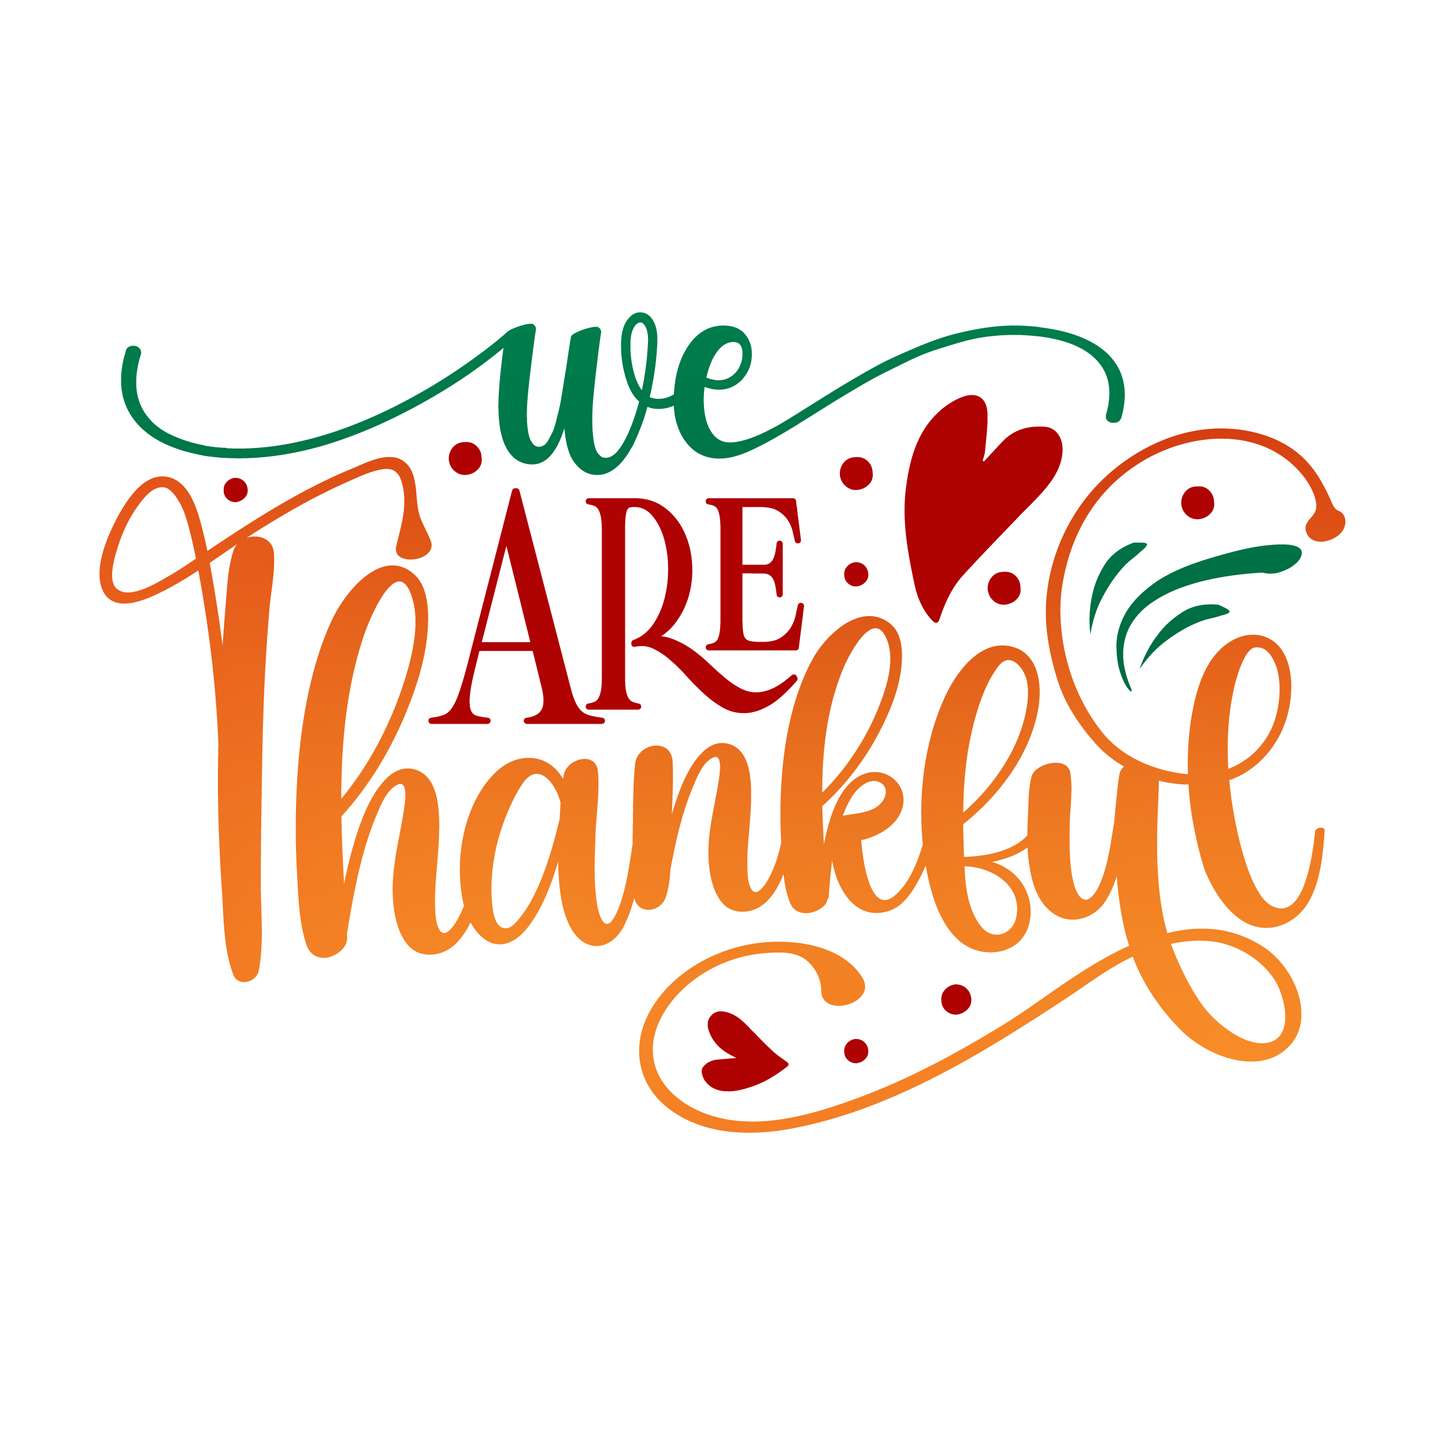 Inspirational Quote We Are Thankful Motivational Sticker Vinyl Decal Motivation Stickers- 5" Vinyl Sticker Waterproof